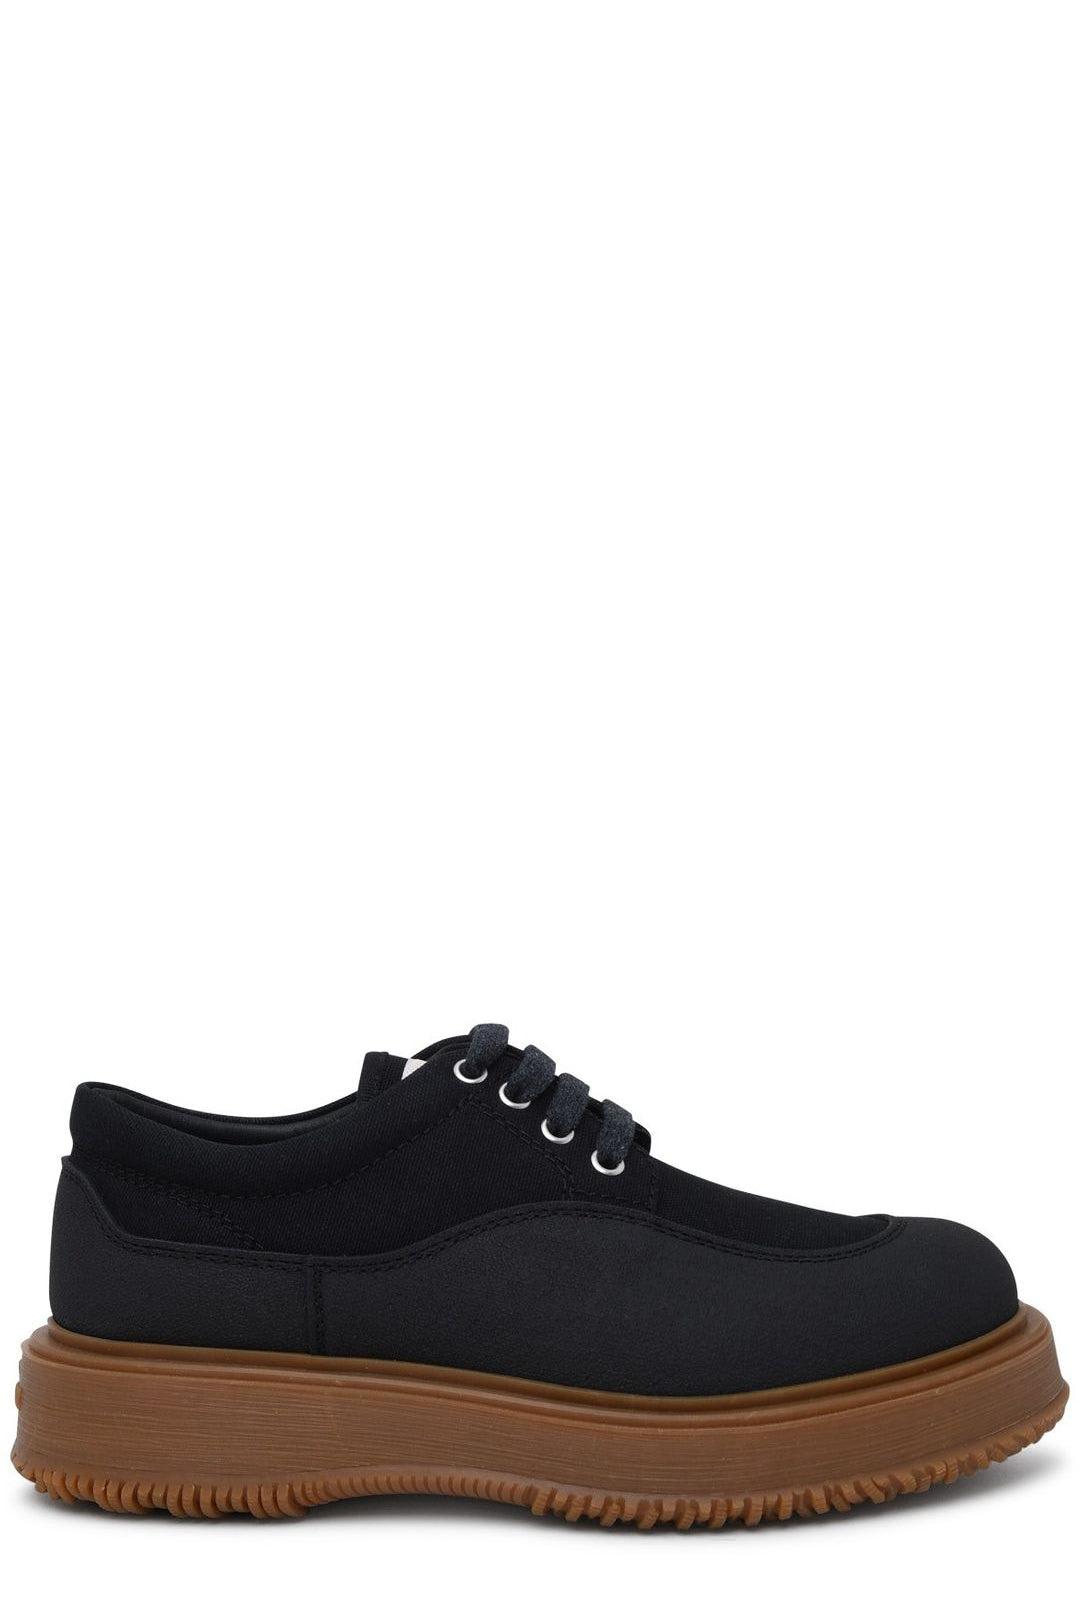 HOGAN UNTRADITIONAL LOGO EMBOSSED LACE-UP SHOES